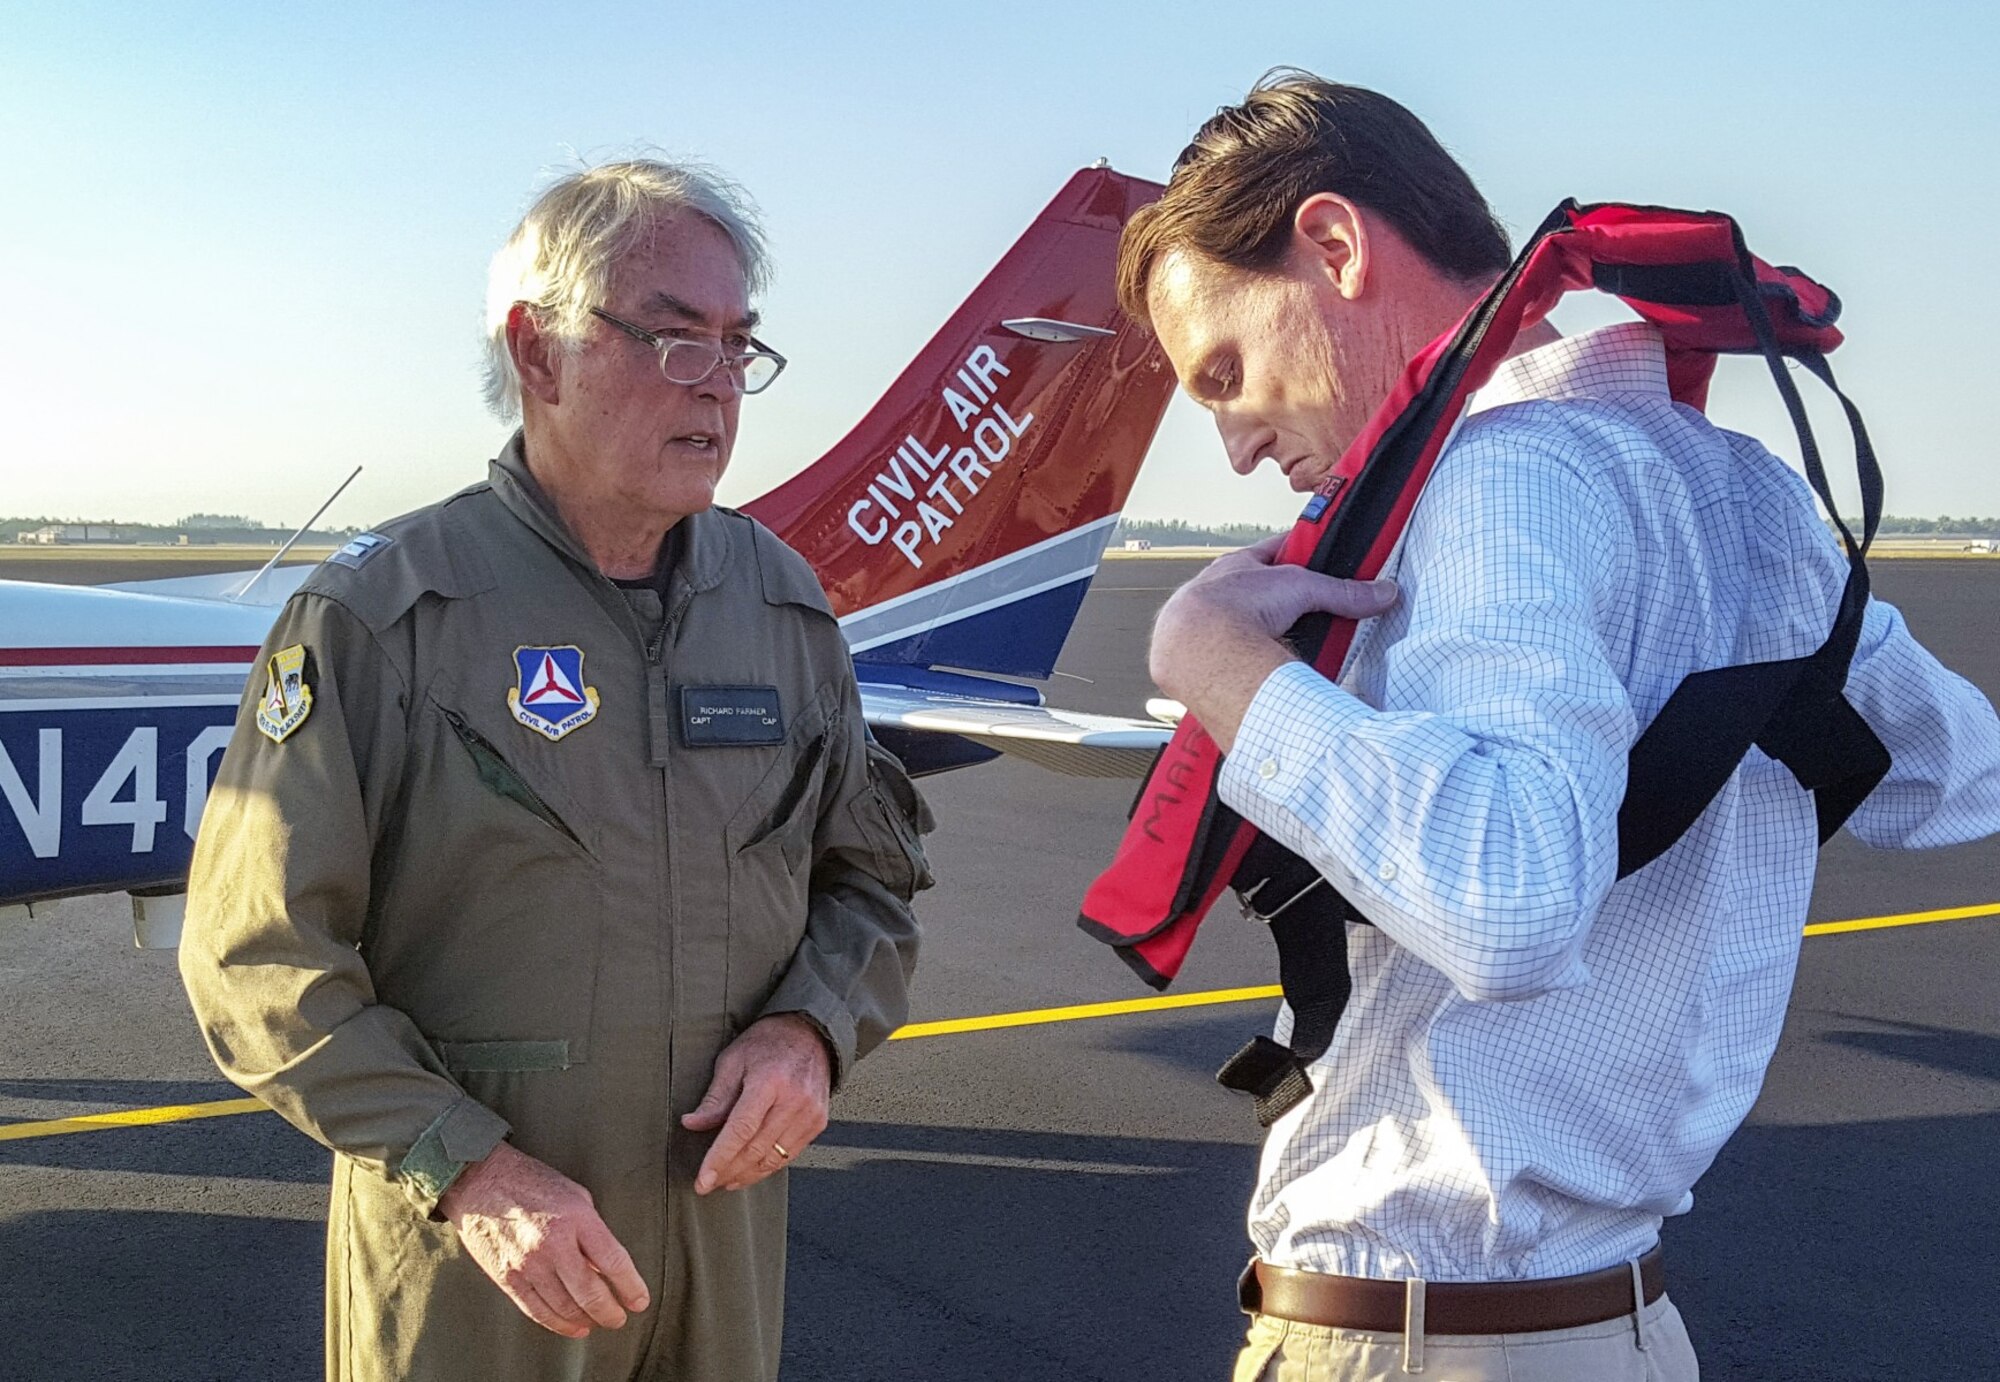 Civil Air Patrol mission pilot Capt. Richard Farmer, a member of the Florida Wing’s Marco Island Senior Squadron, briefs WPTV reporter Charlie Keegan on safety procedures for a NORAD intercept exercise over south Florida. Photo by CAP Lt. Col. Jeff Carlson